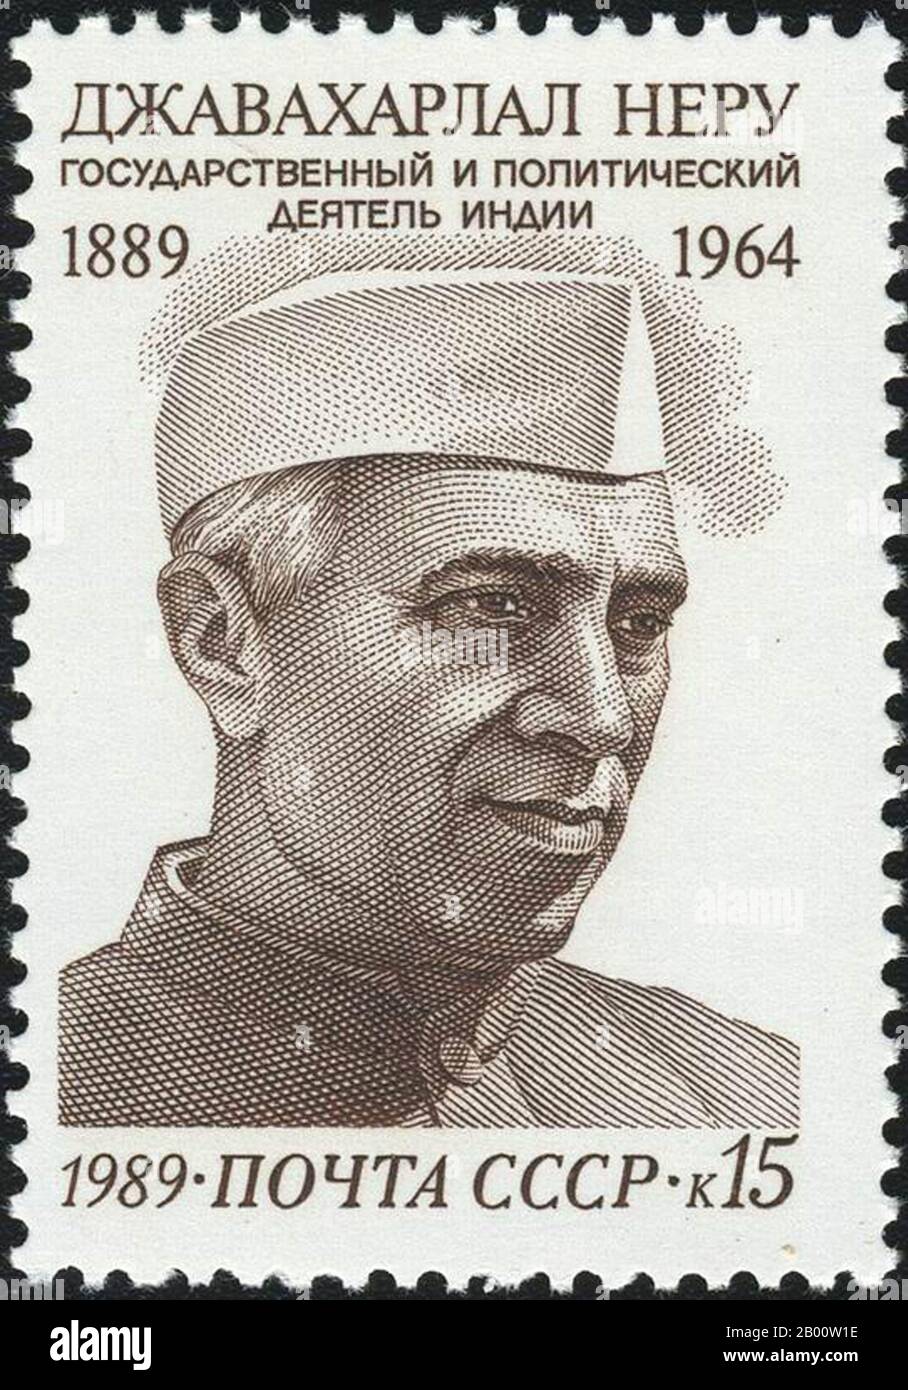 India/USSR: USSR stamp of Jawaharlal Nehru, first Prime Minister of India (1947-1964).  Jawaharlal Nehru (14 November 1889–27 May 1964) was an Indian statesman who was the first (and to date longest-serving) prime minister of India, from 1947 until 1964. One of the leading figures in the Indian independence movement, Nehru was elected by the Congress Party to assume office as independent India's first Prime Minister, and re-elected when the Congress Party won India's first general election in 1952. He was also one of the founders of the Non-aligned Movement. Stock Photo